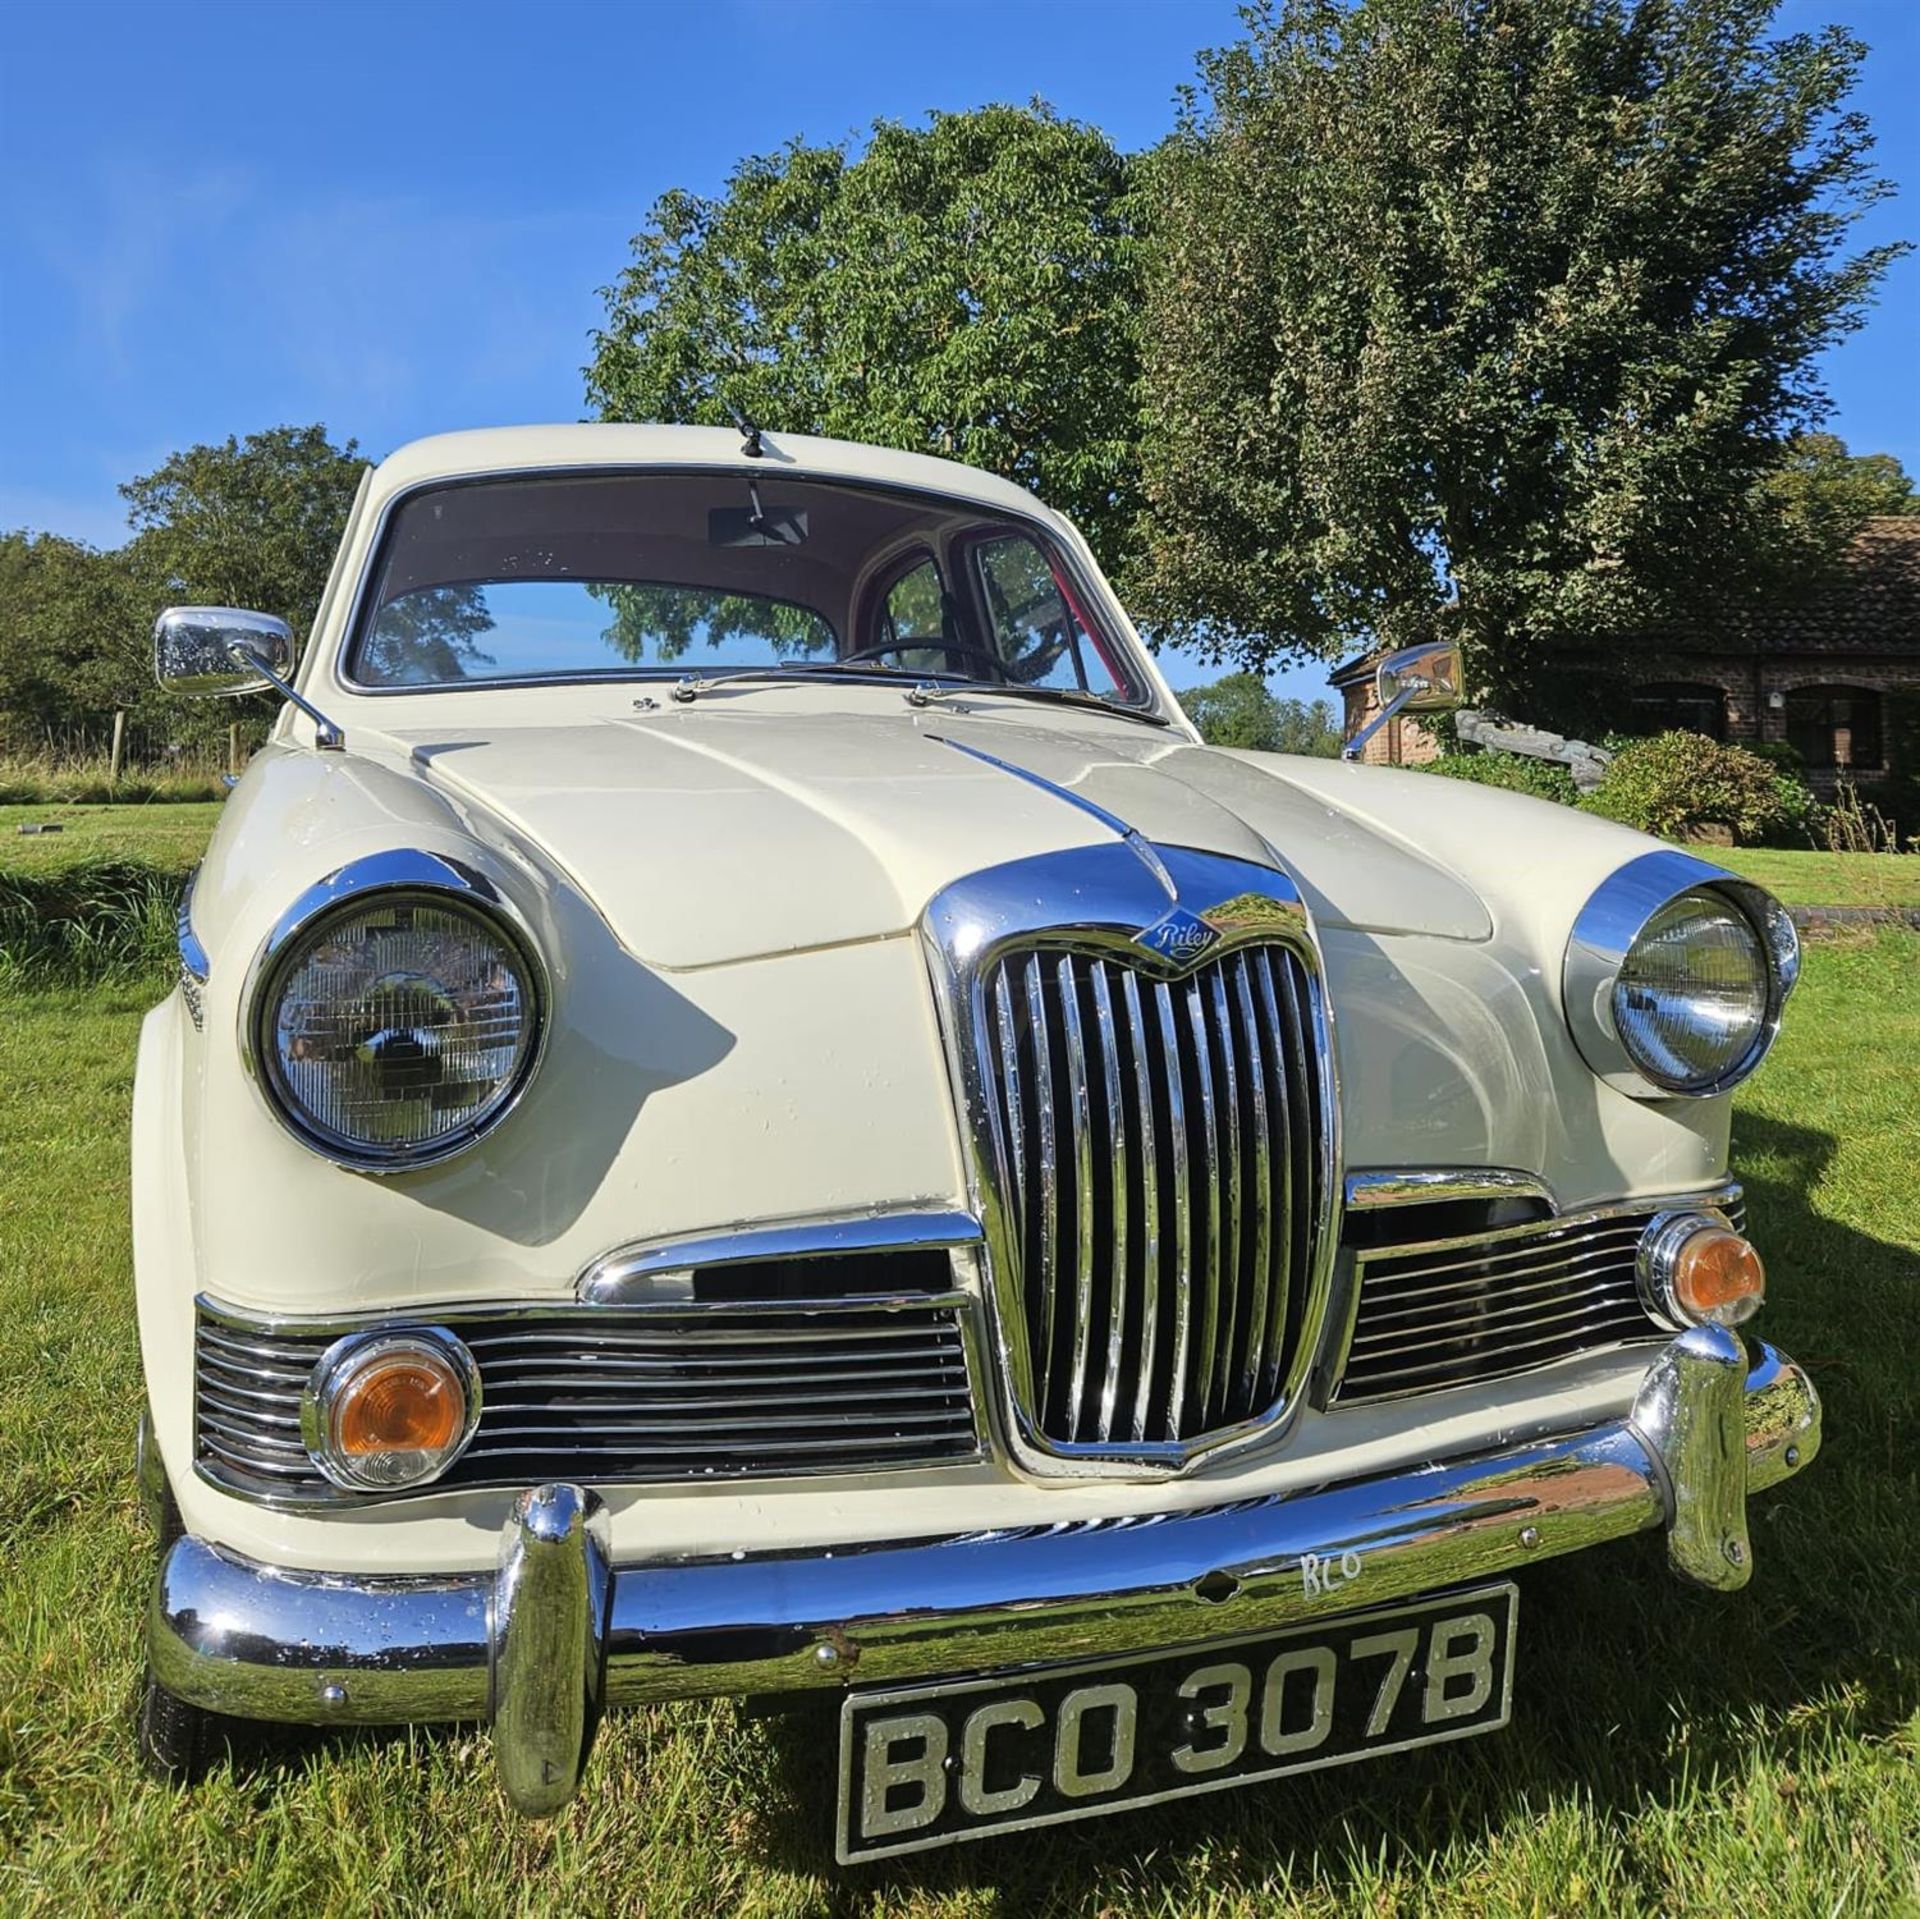 1964 Riley One-Point-Five - Image 10 of 10